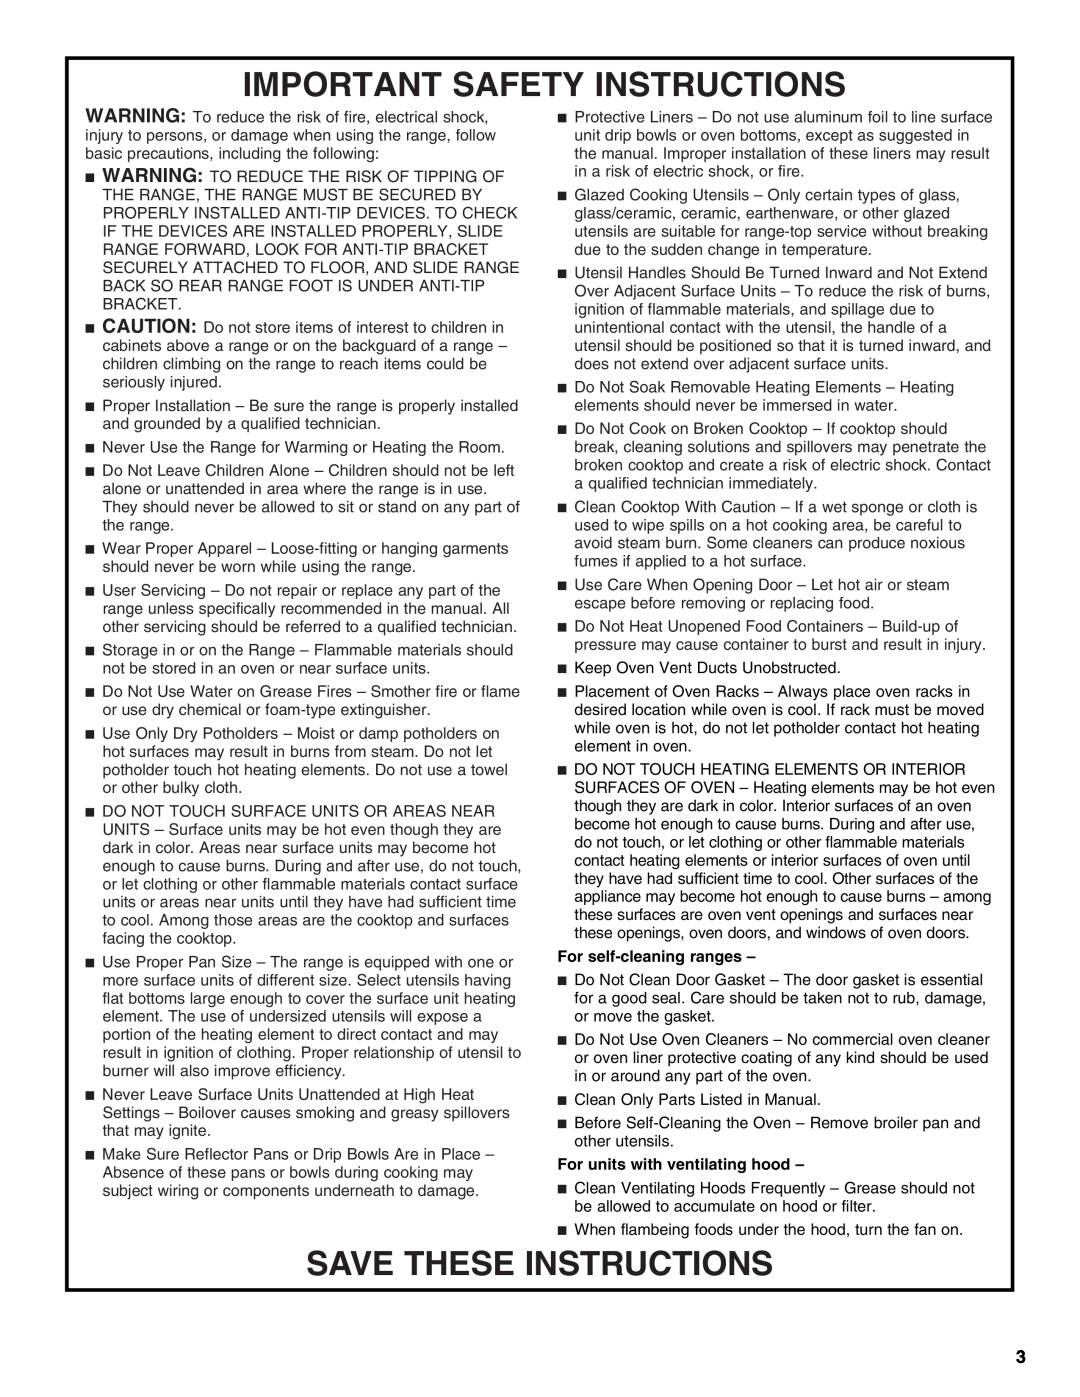 Whirlpool W10200359D warranty Important Safety Instructions, Save These Instructions, For self-cleaningranges 